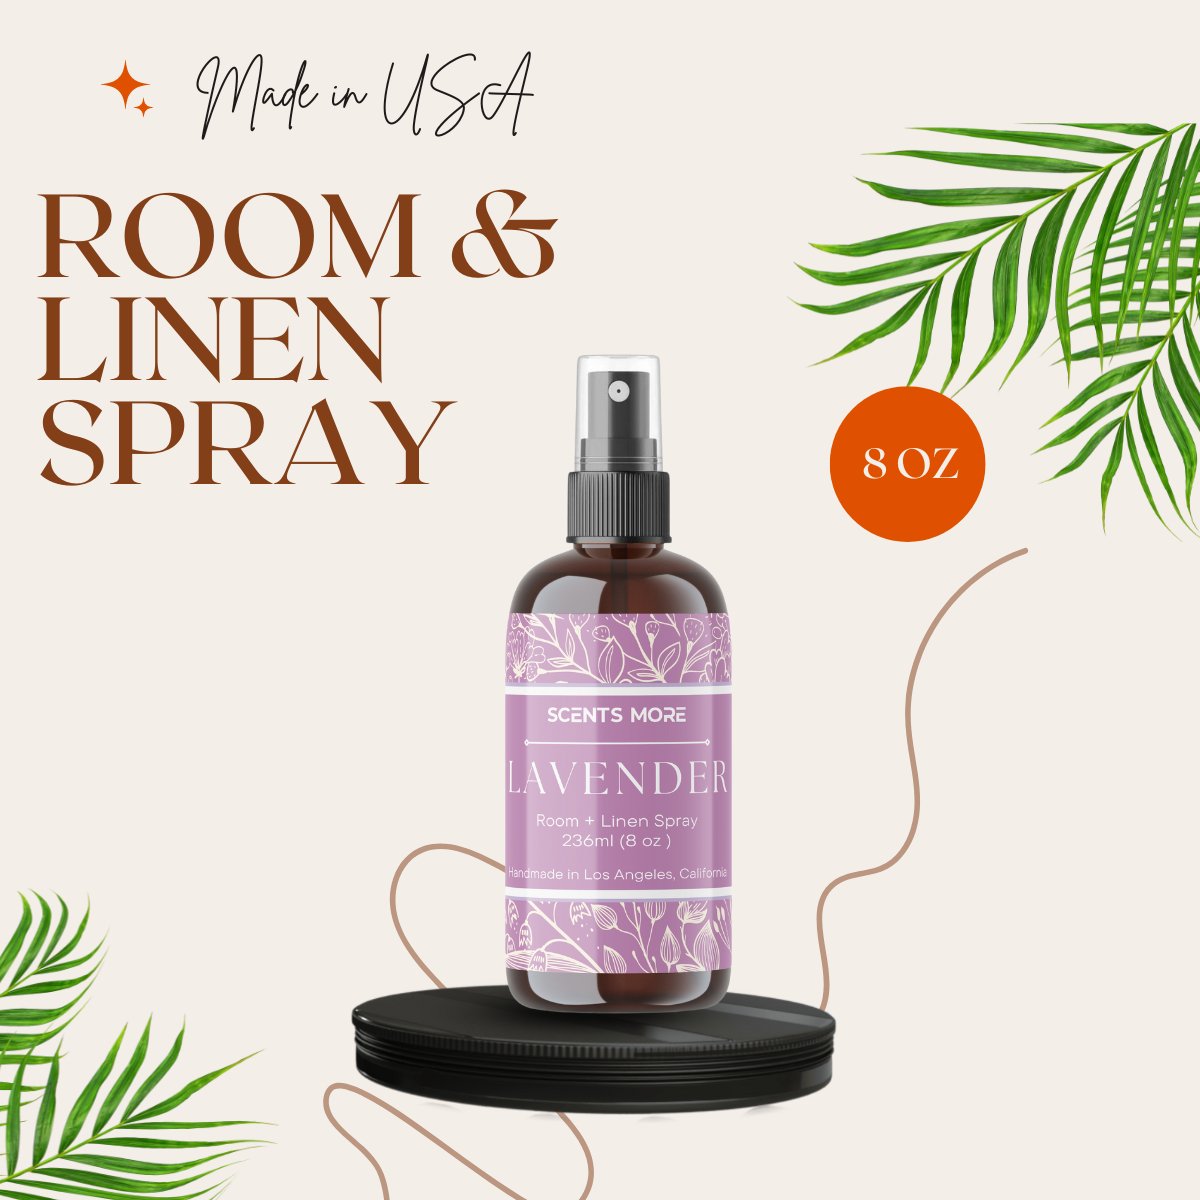 Lavender Room & Linen Spray - Air Fresheners For Home 8oz - Scents More